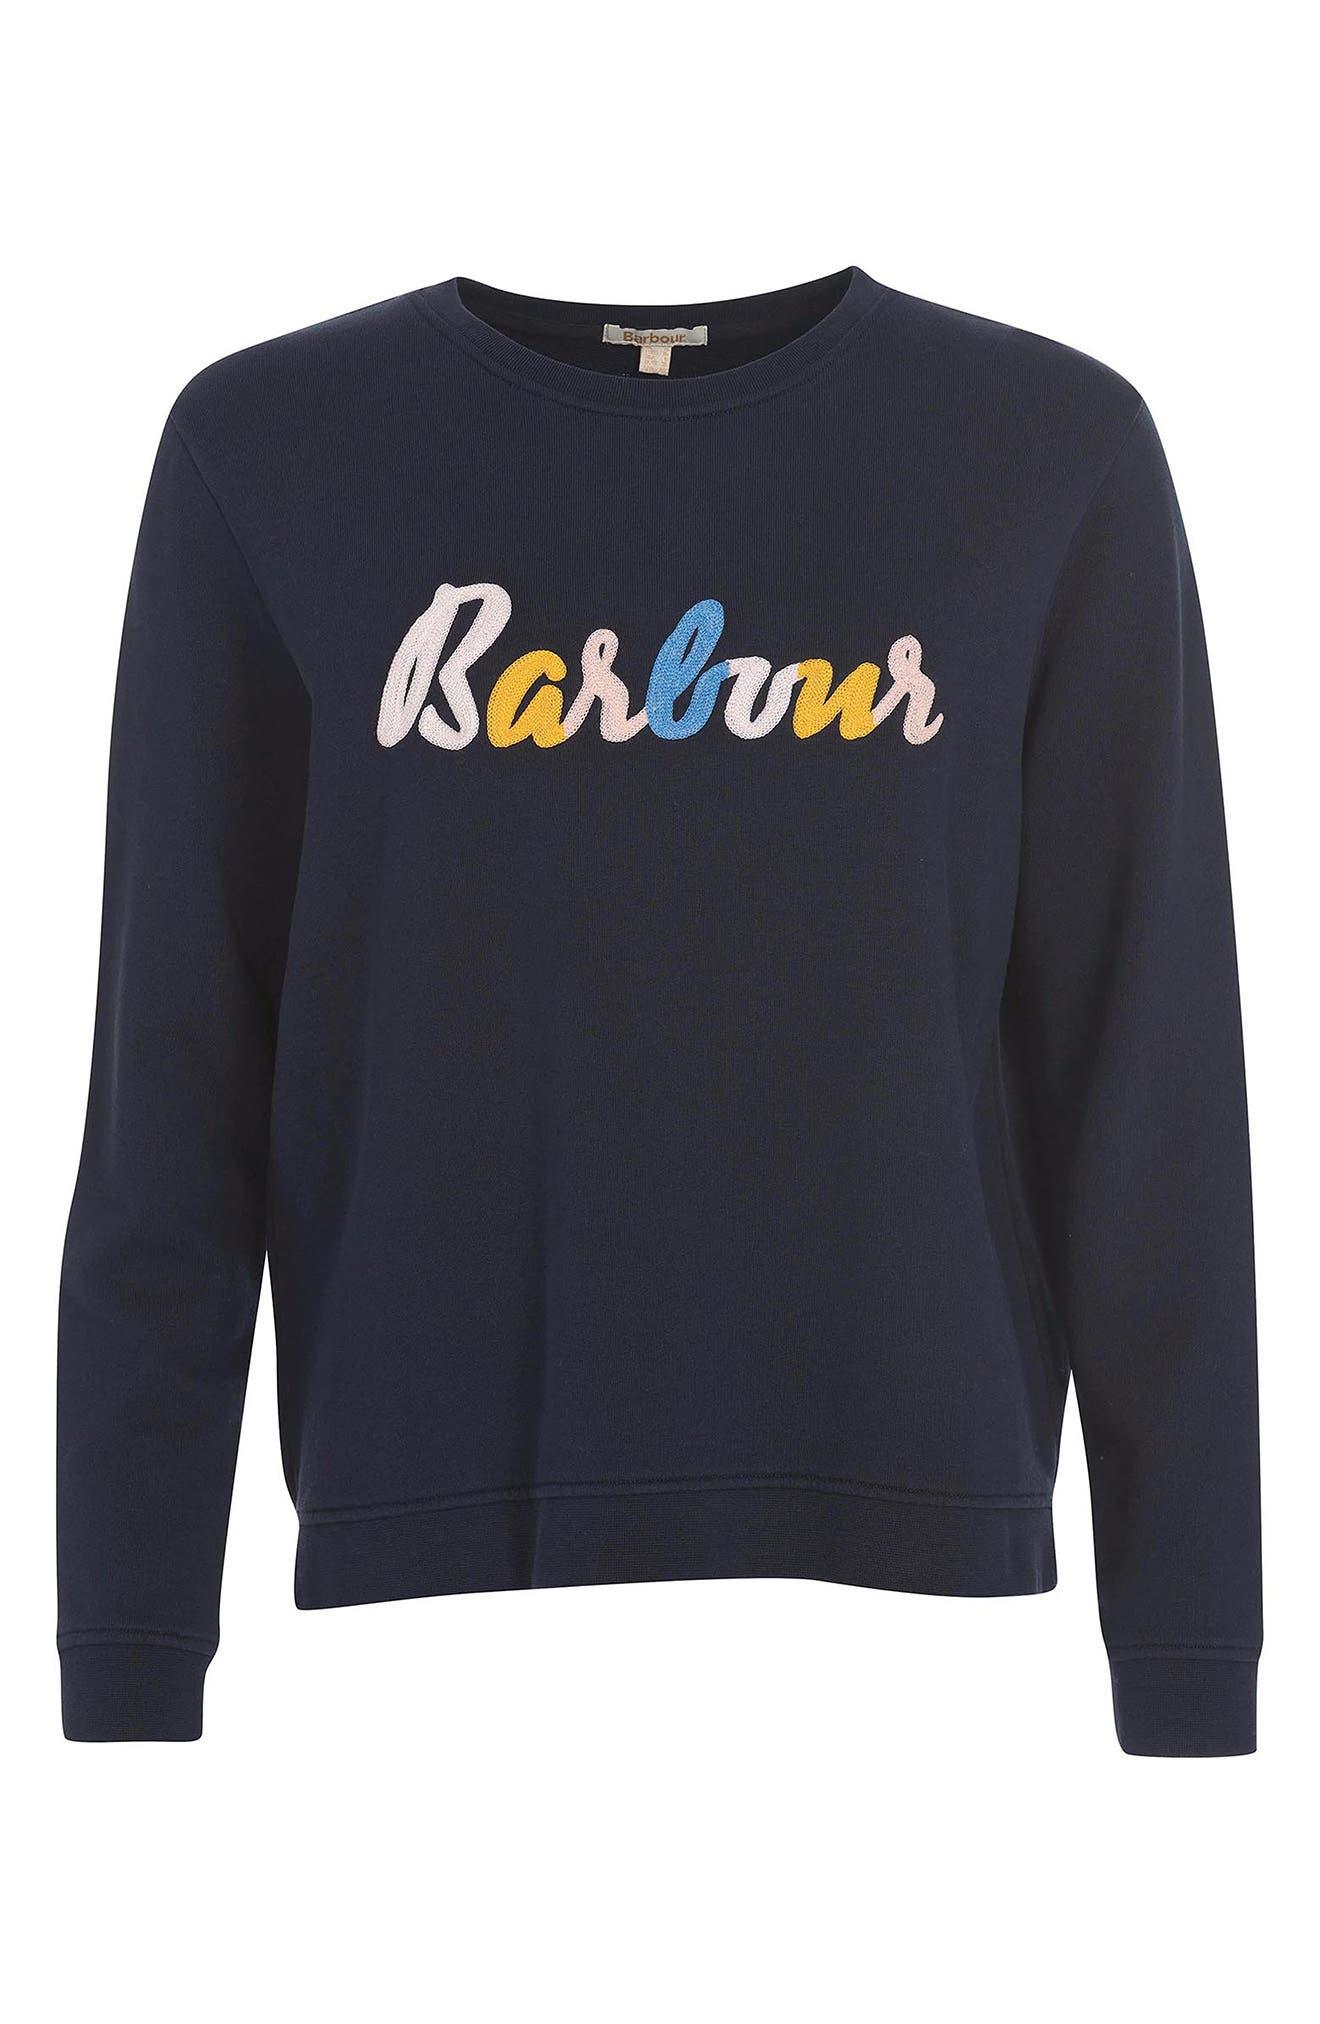 Barbour Blyth Logo Cotton Sweater In Navy At Nordstrom Rack in